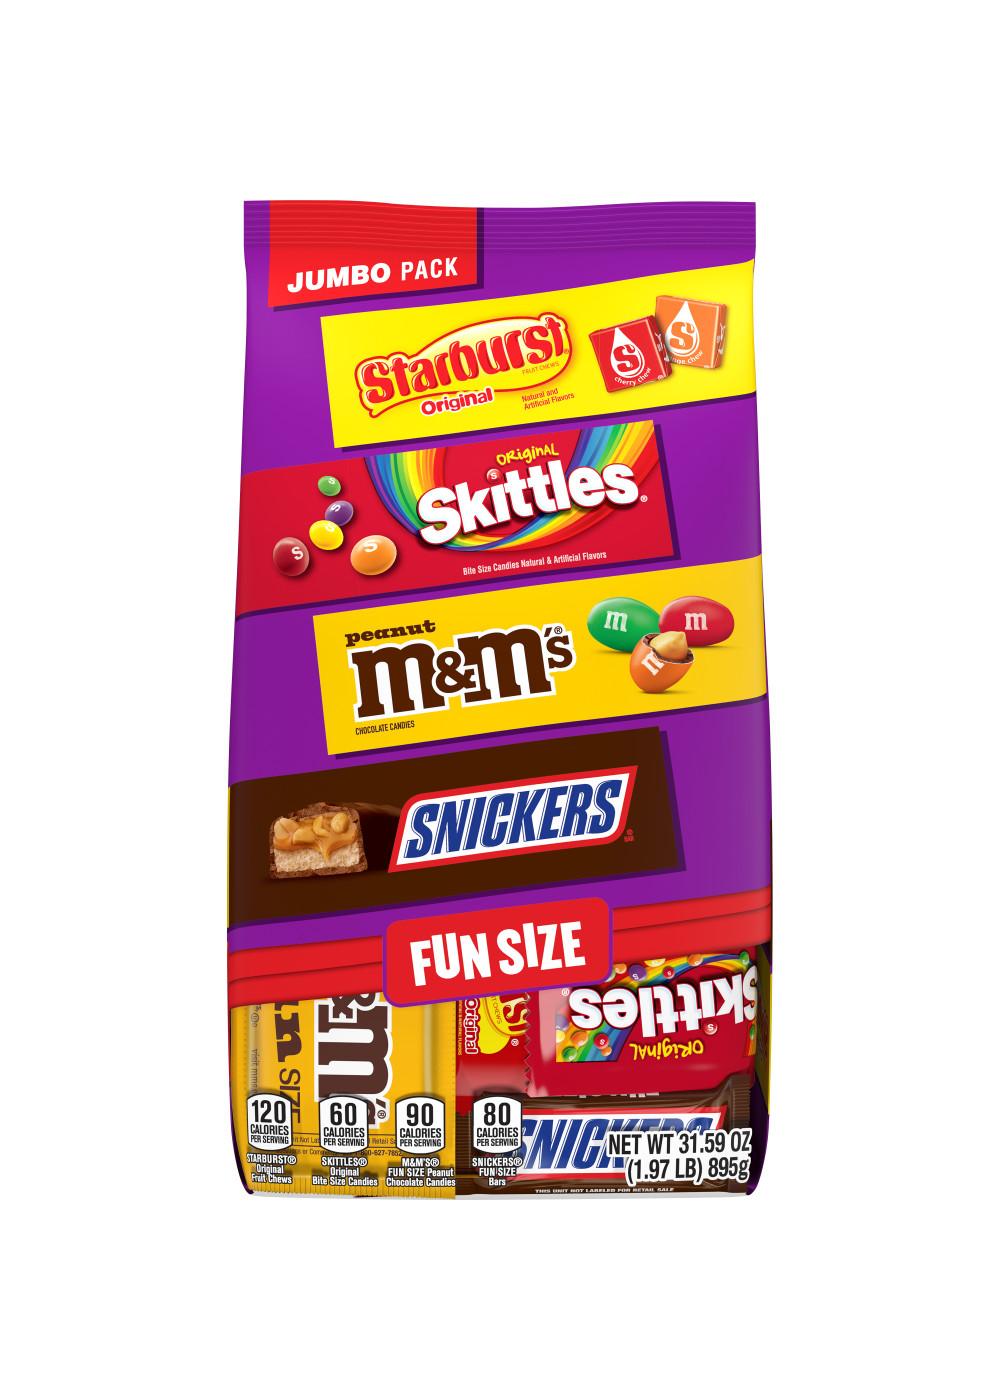 M&M'S, Snickers, Skittles, & Starburst Assorted Fun Size Candy - Jumbo Pack; image 1 of 7